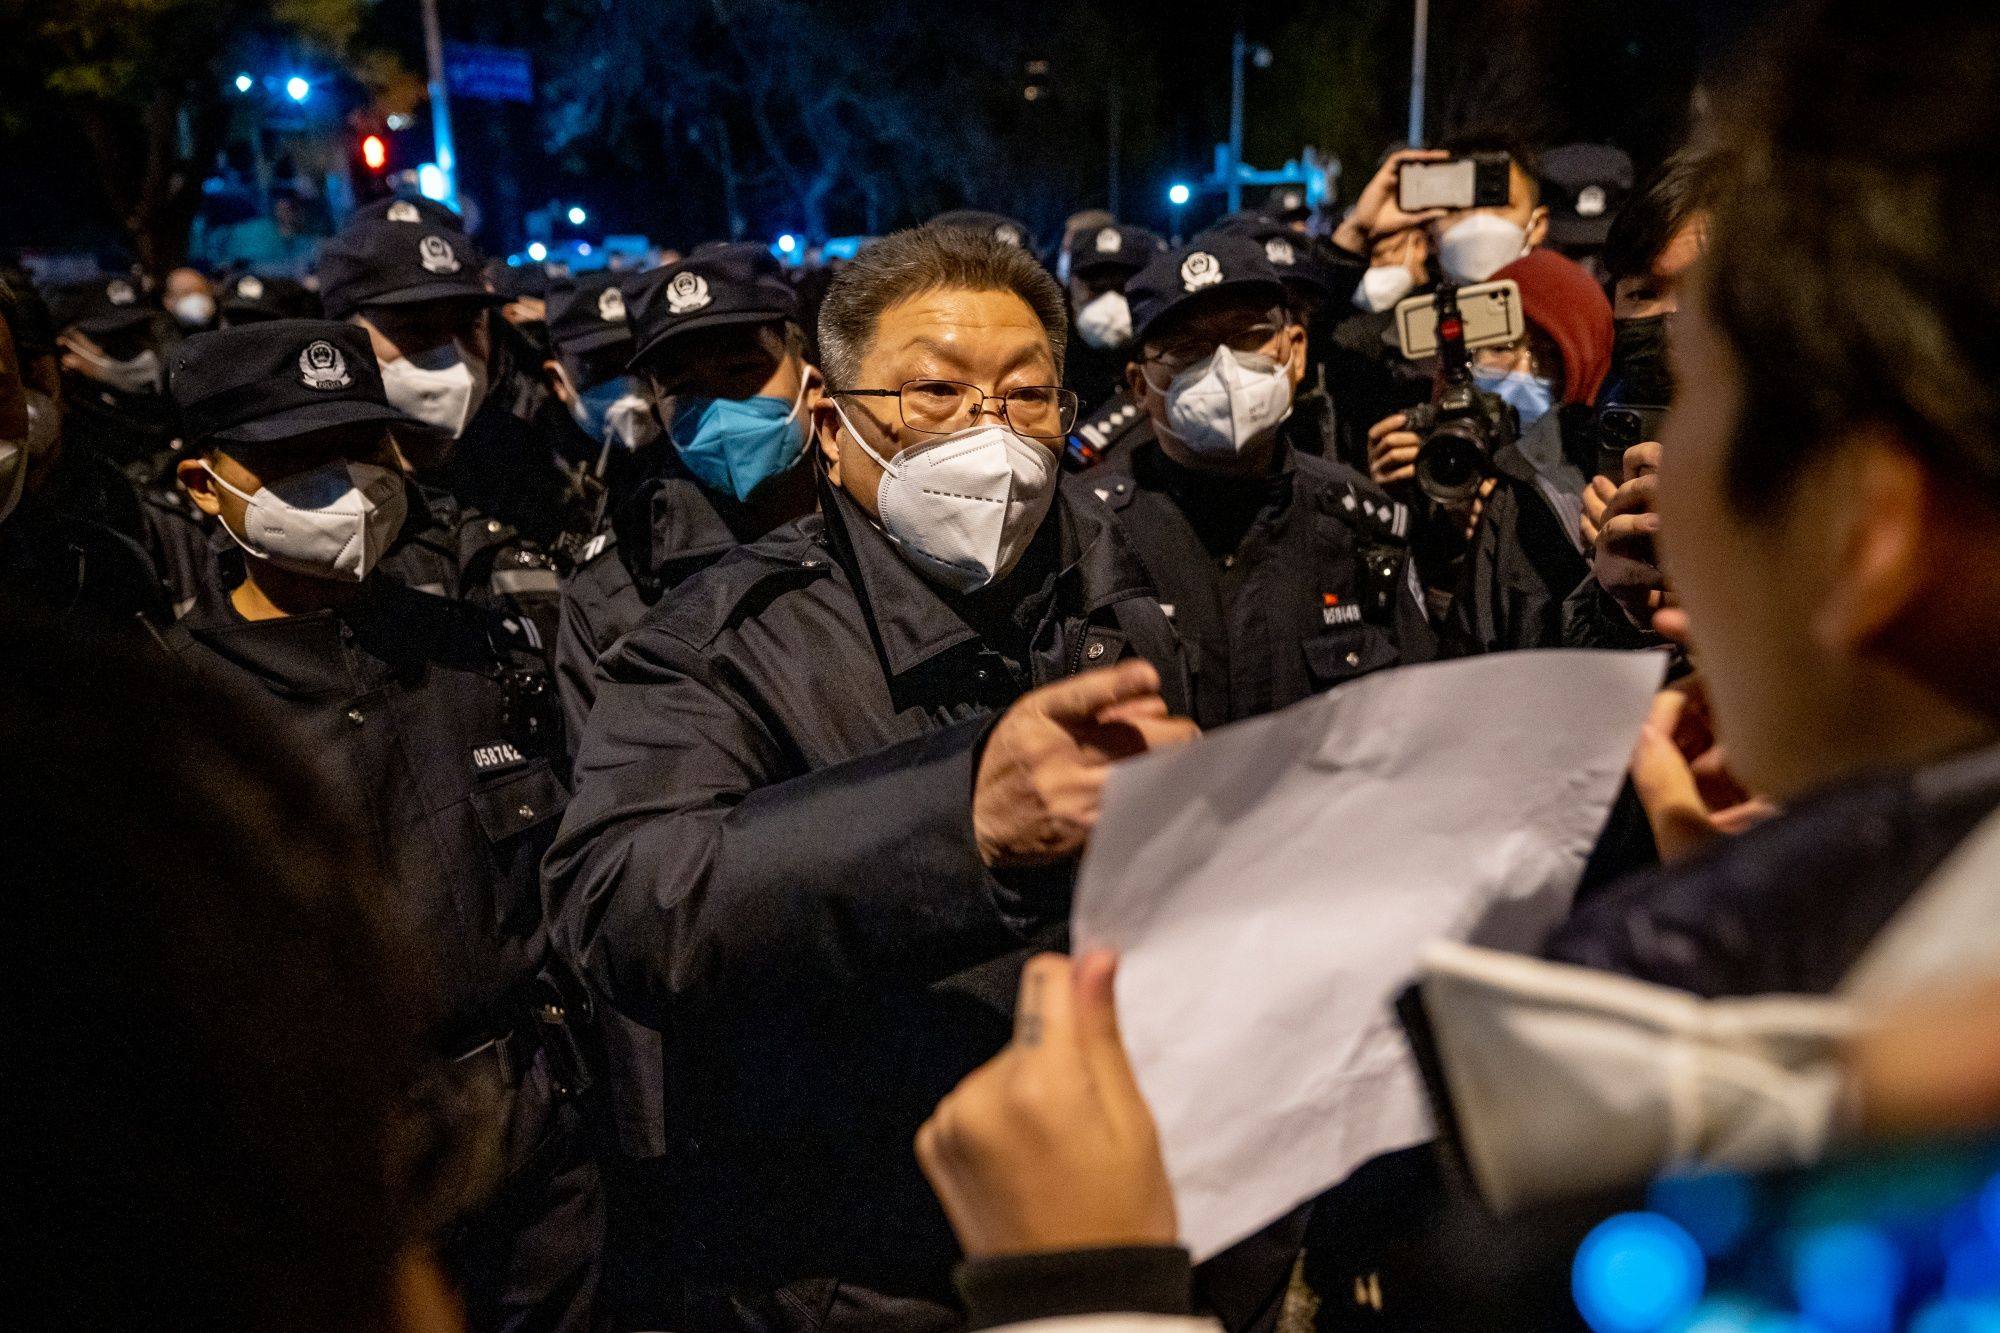 A local official shouts at a demonstrator holding a blank sign during a protest in Beijing on November 28. The rare outpouring of public anger over China’s continued lockdowns led to a reversal in the country’s pandemic policies, a decision that will ripple through the domestic, regional and global economies. Photo: Bloomberg